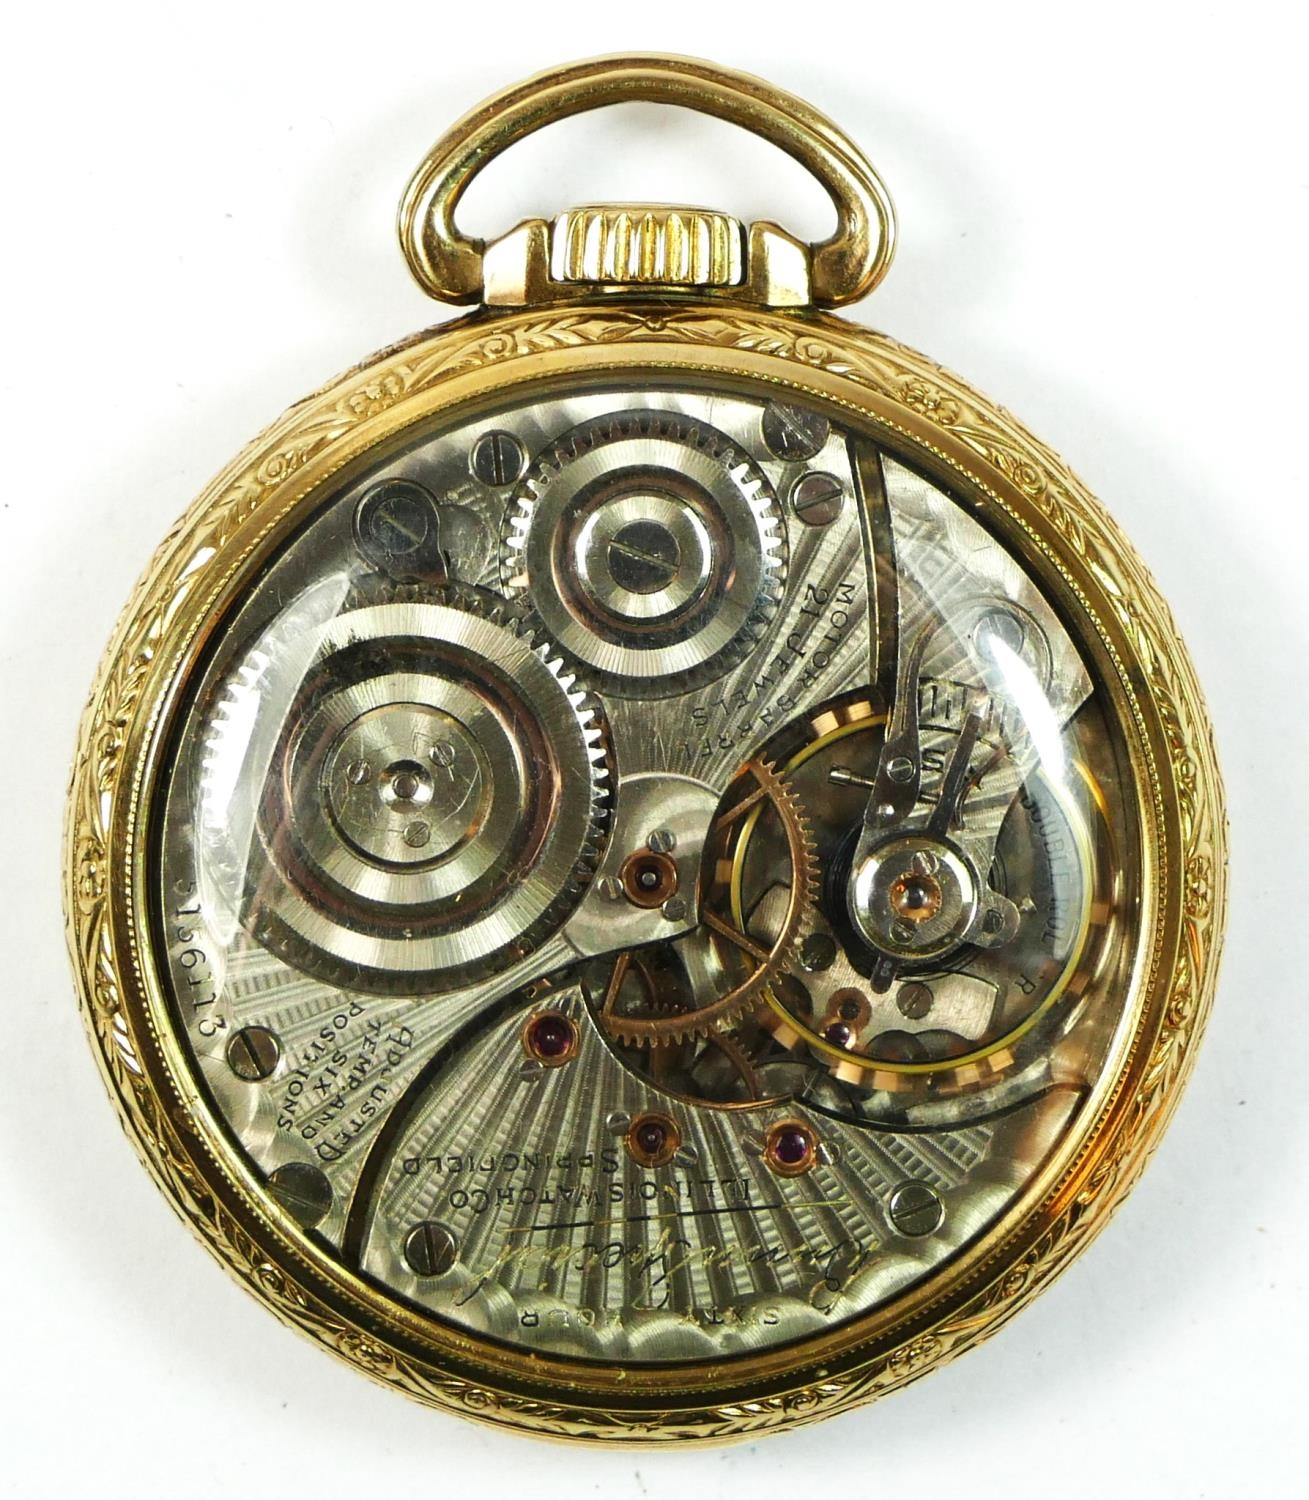 Illinois Watch Company 'Bunn Special' Sixty Hour 10k gold filled lever set pocket watch, circa 1929, - Image 2 of 5